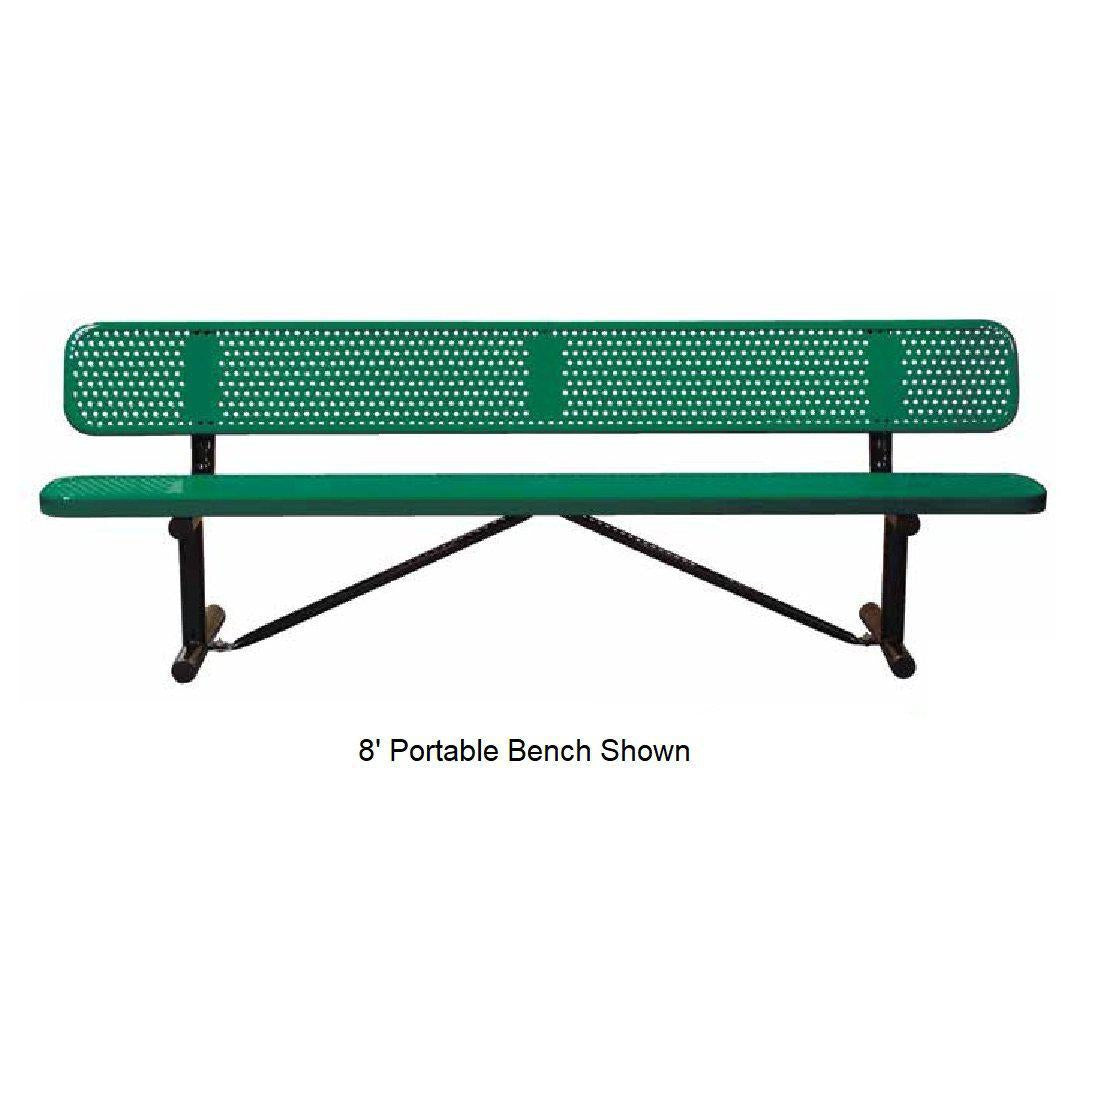 6’ Standard Perforated Bench With Back, Surface Mount